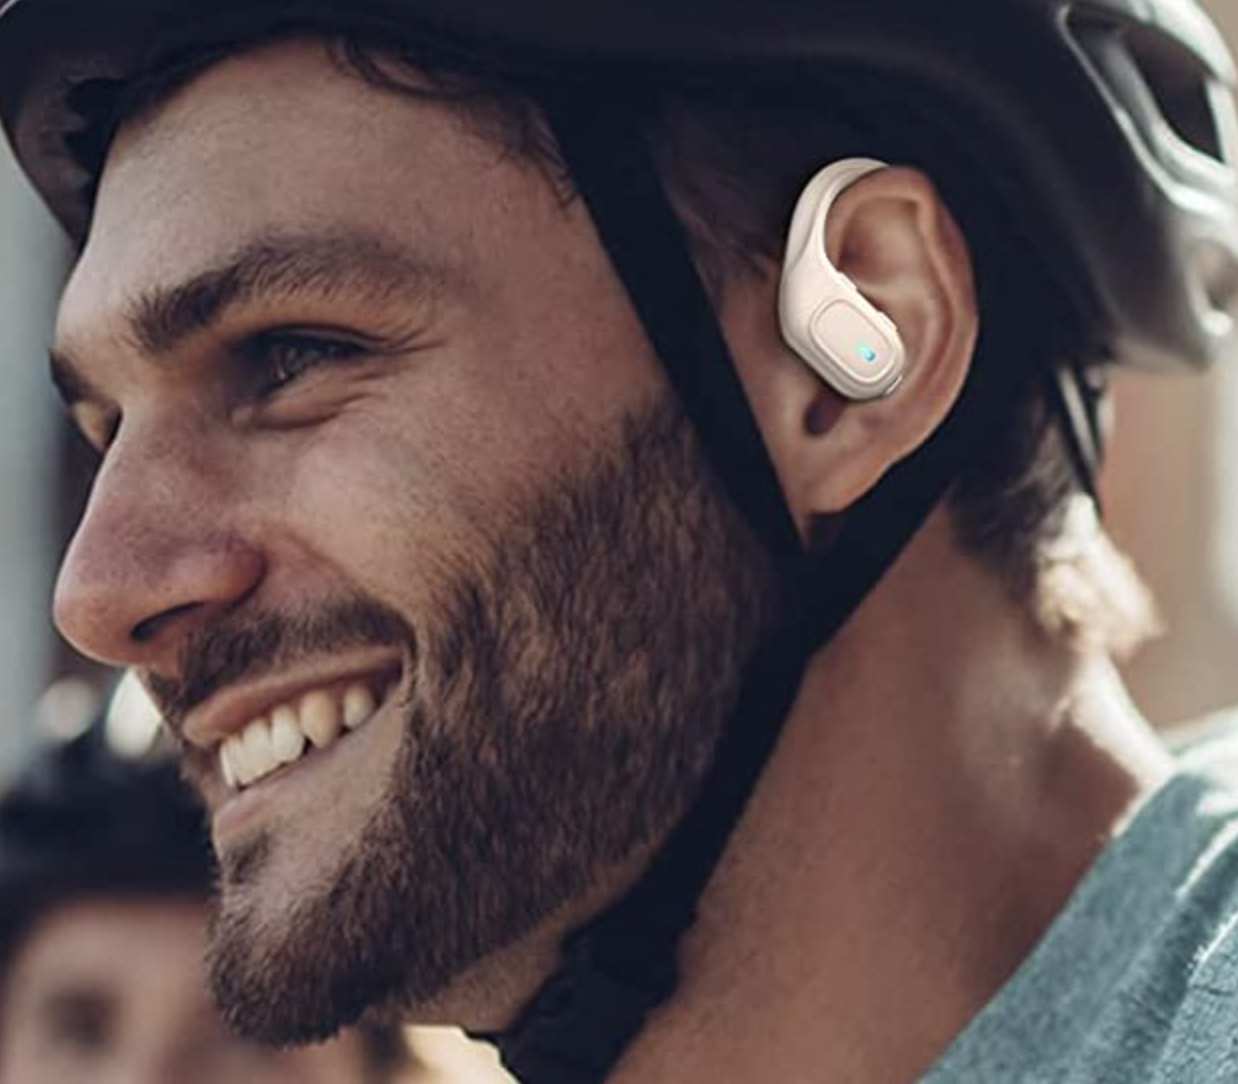 a person riding a bike wearing the earbuds